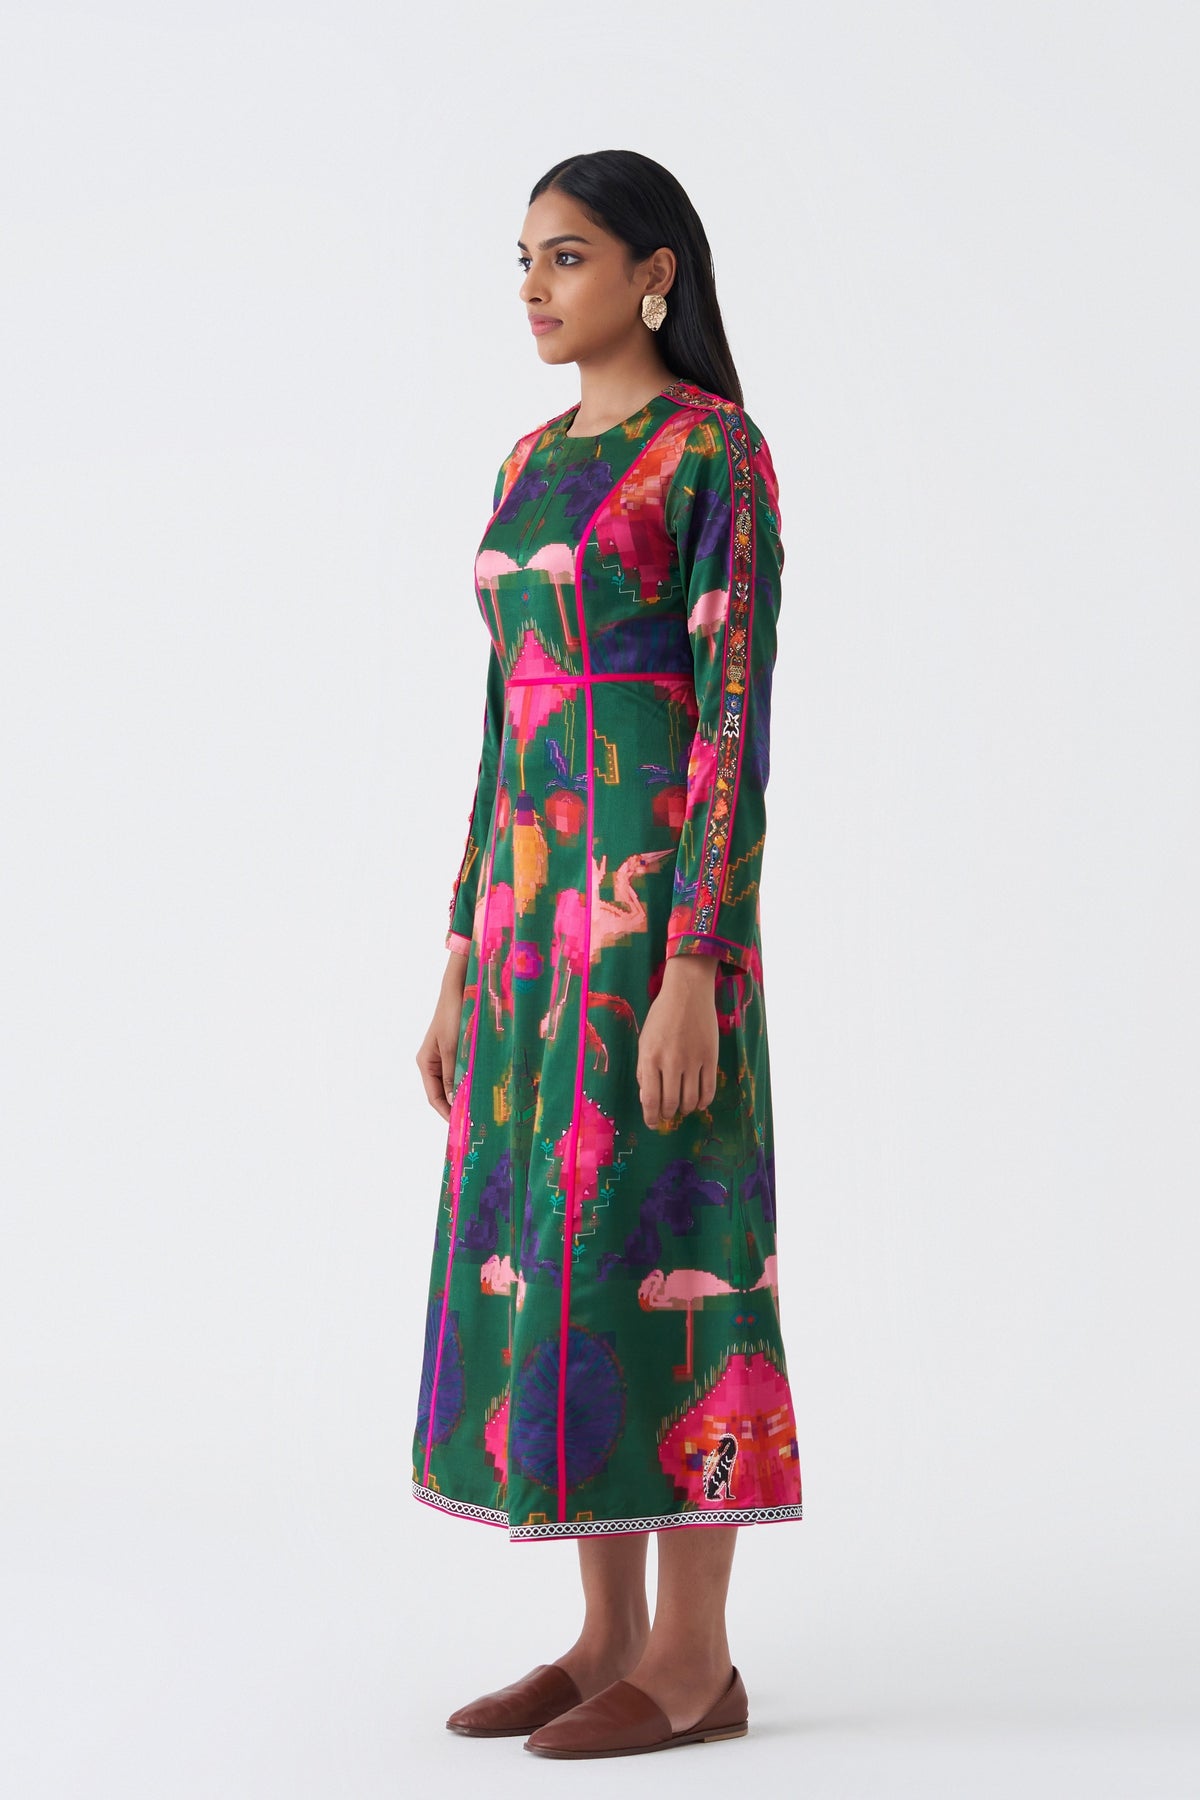 Print and Embroidered Oaxaca Verde Dress